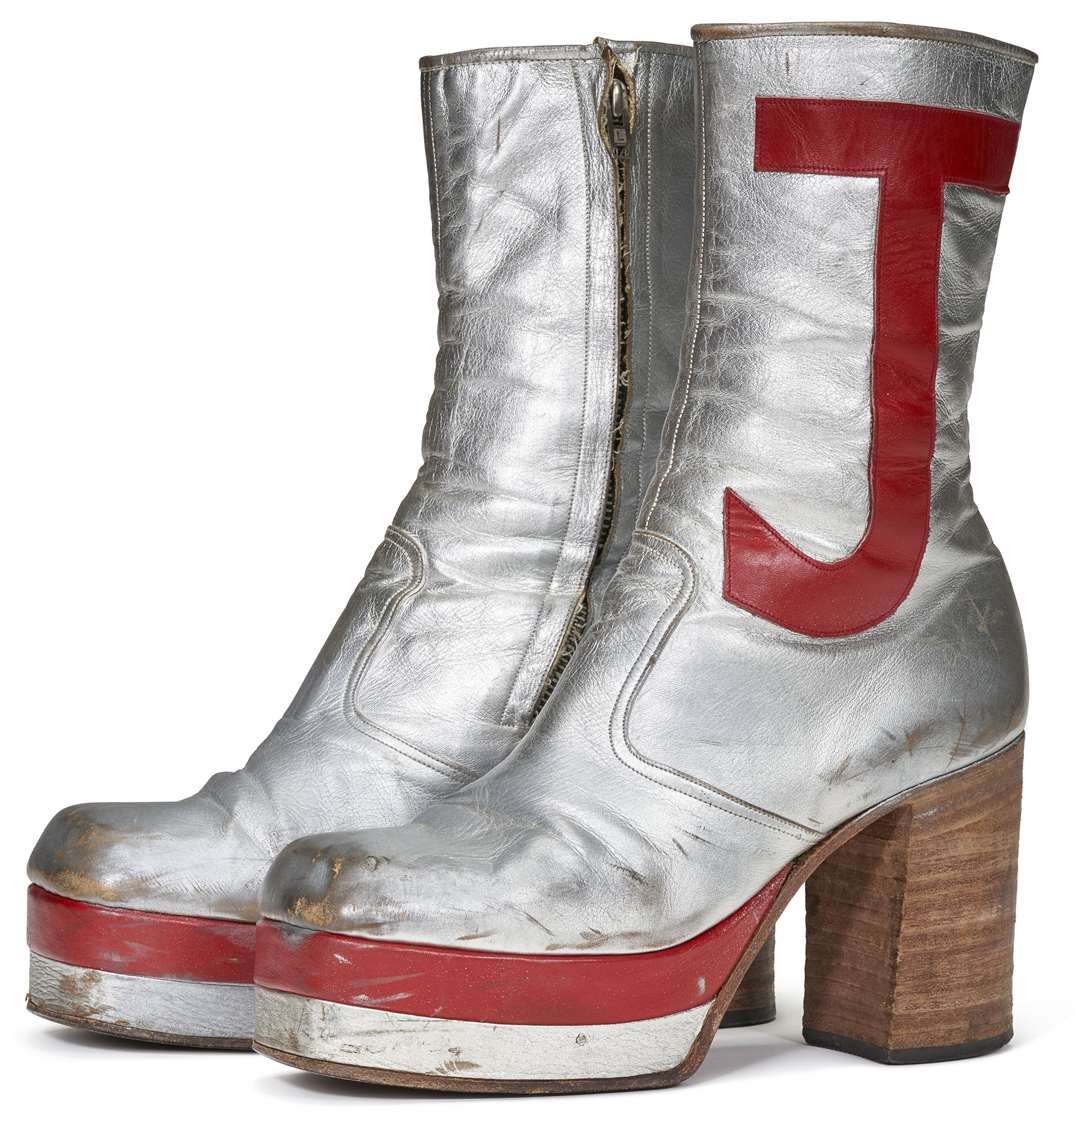 The 1971 silver platform boots could fetch between 5,000 and 10,000 US dollars (Christie’s/PA)